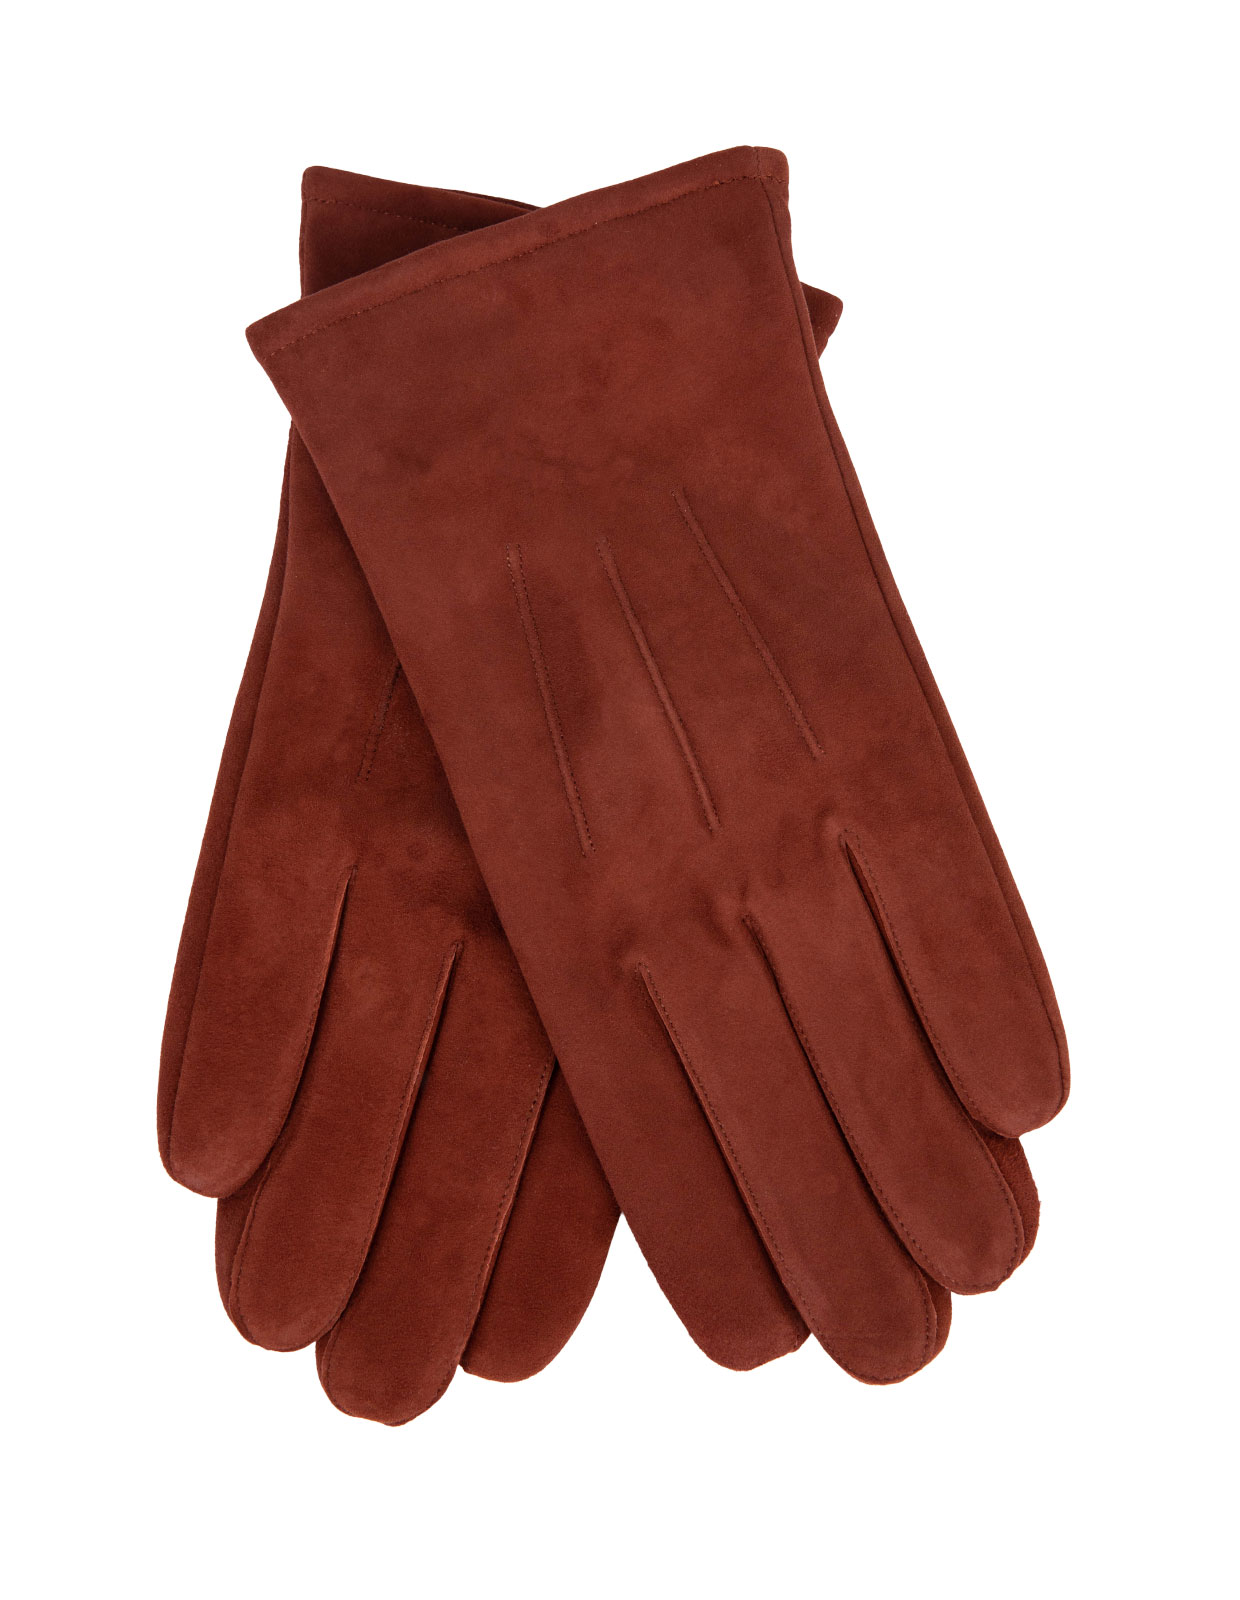 Classic Suede Gloves Red/Brown Stl 7.5